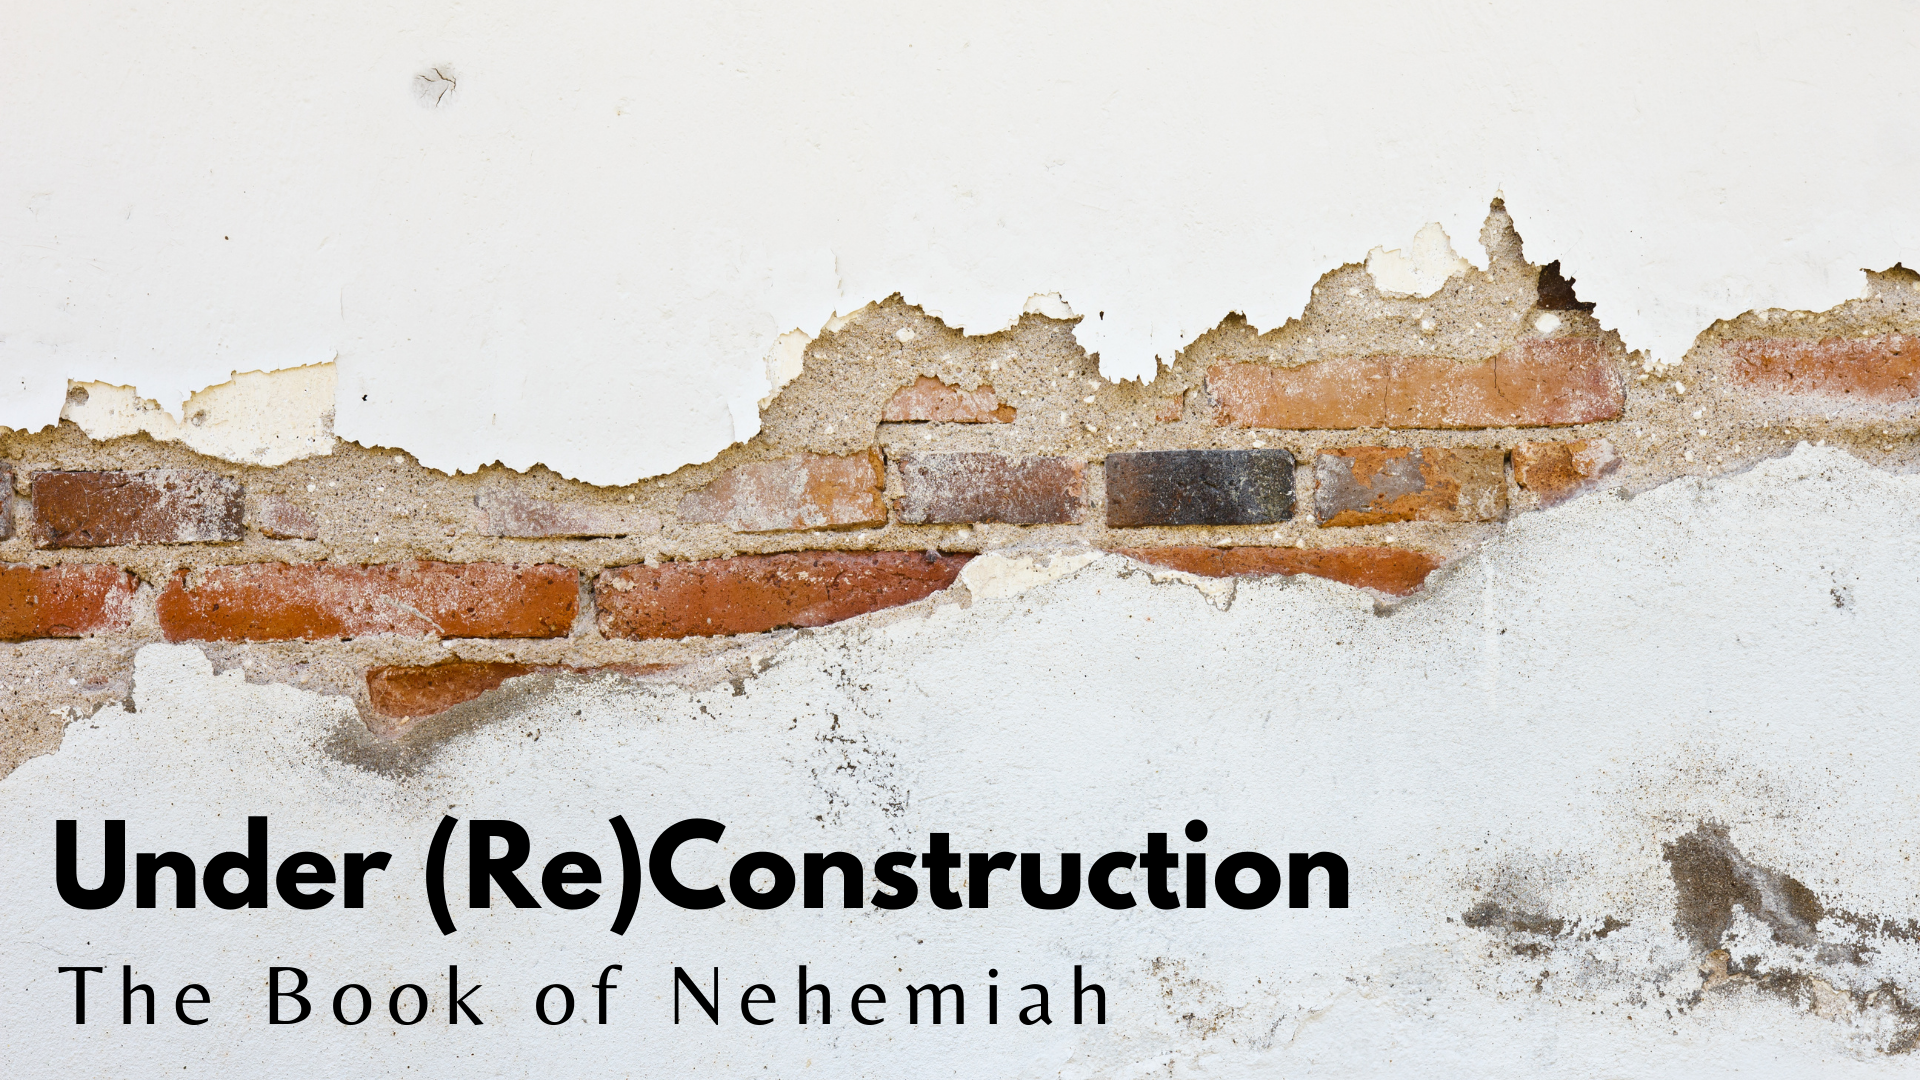 What I Learned from Nehemiah